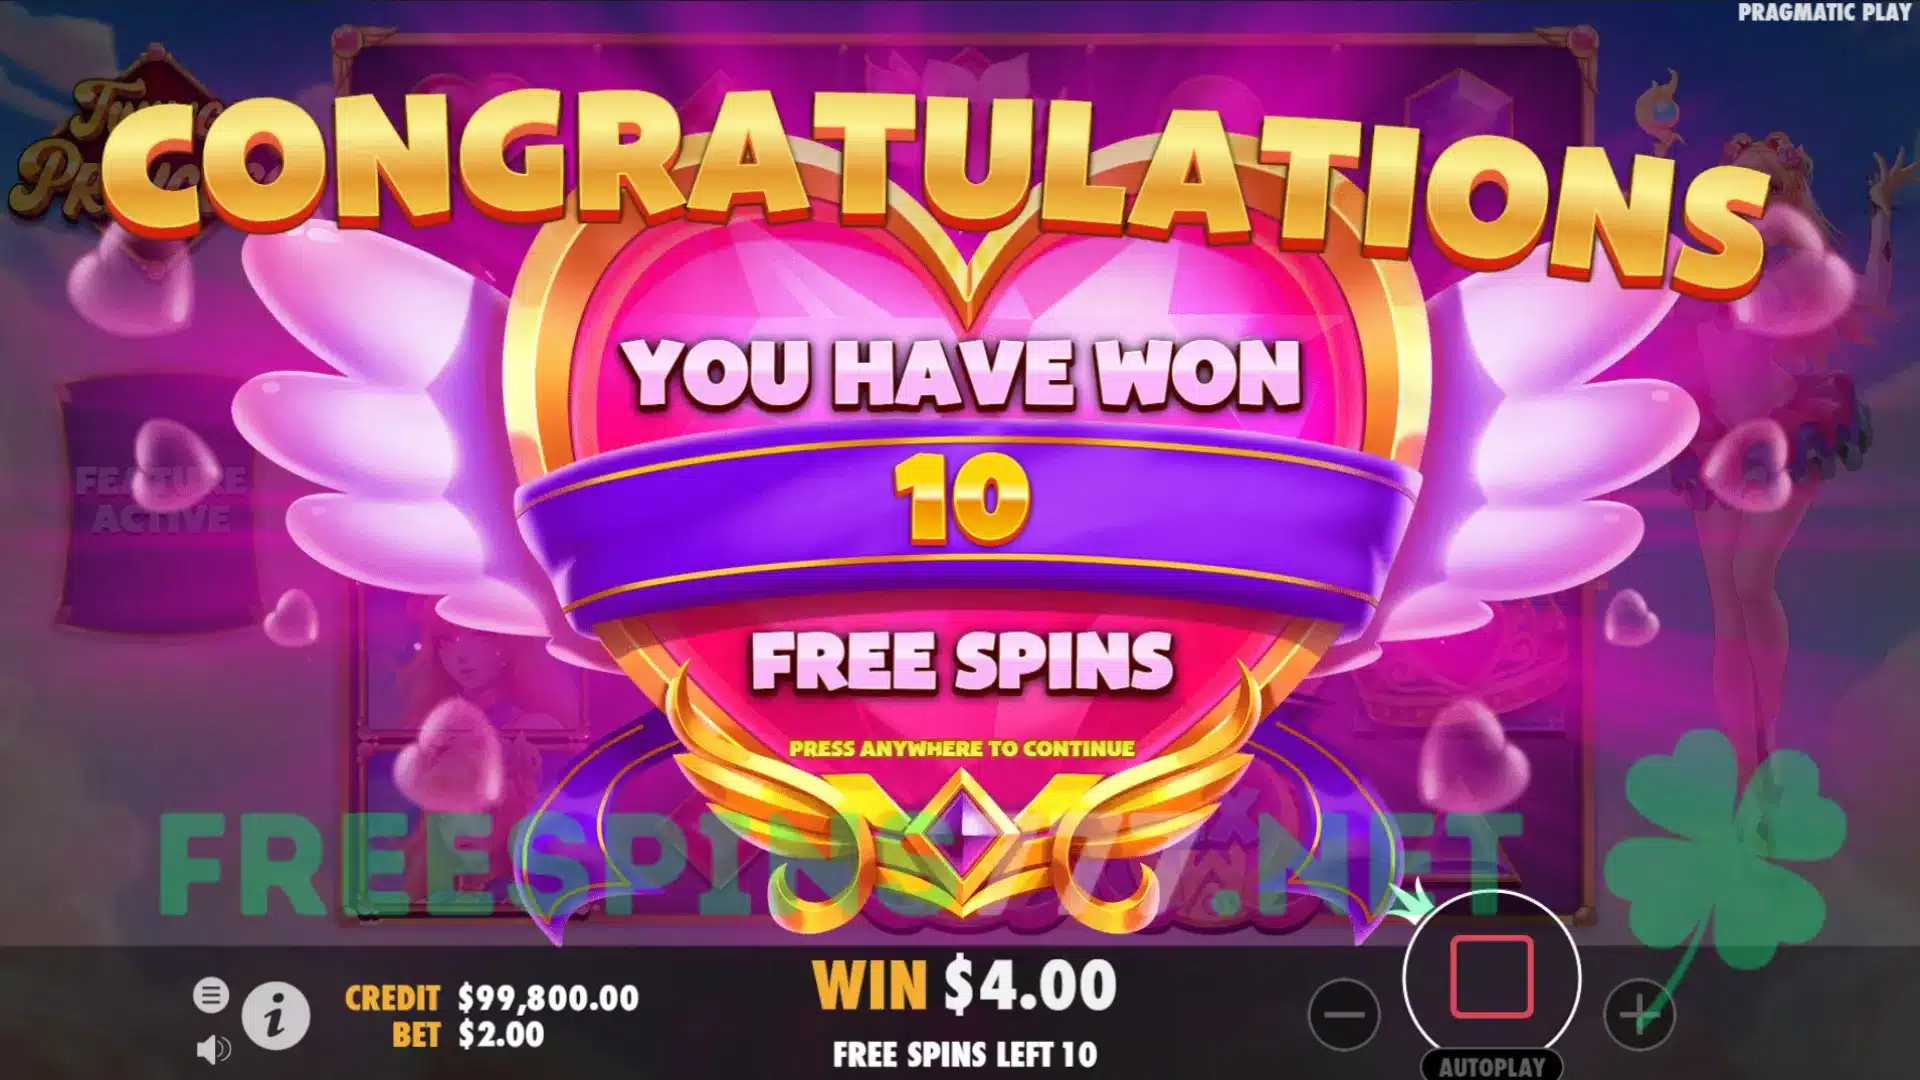 Chasing the Golden Orbs: The Free Spins Feature